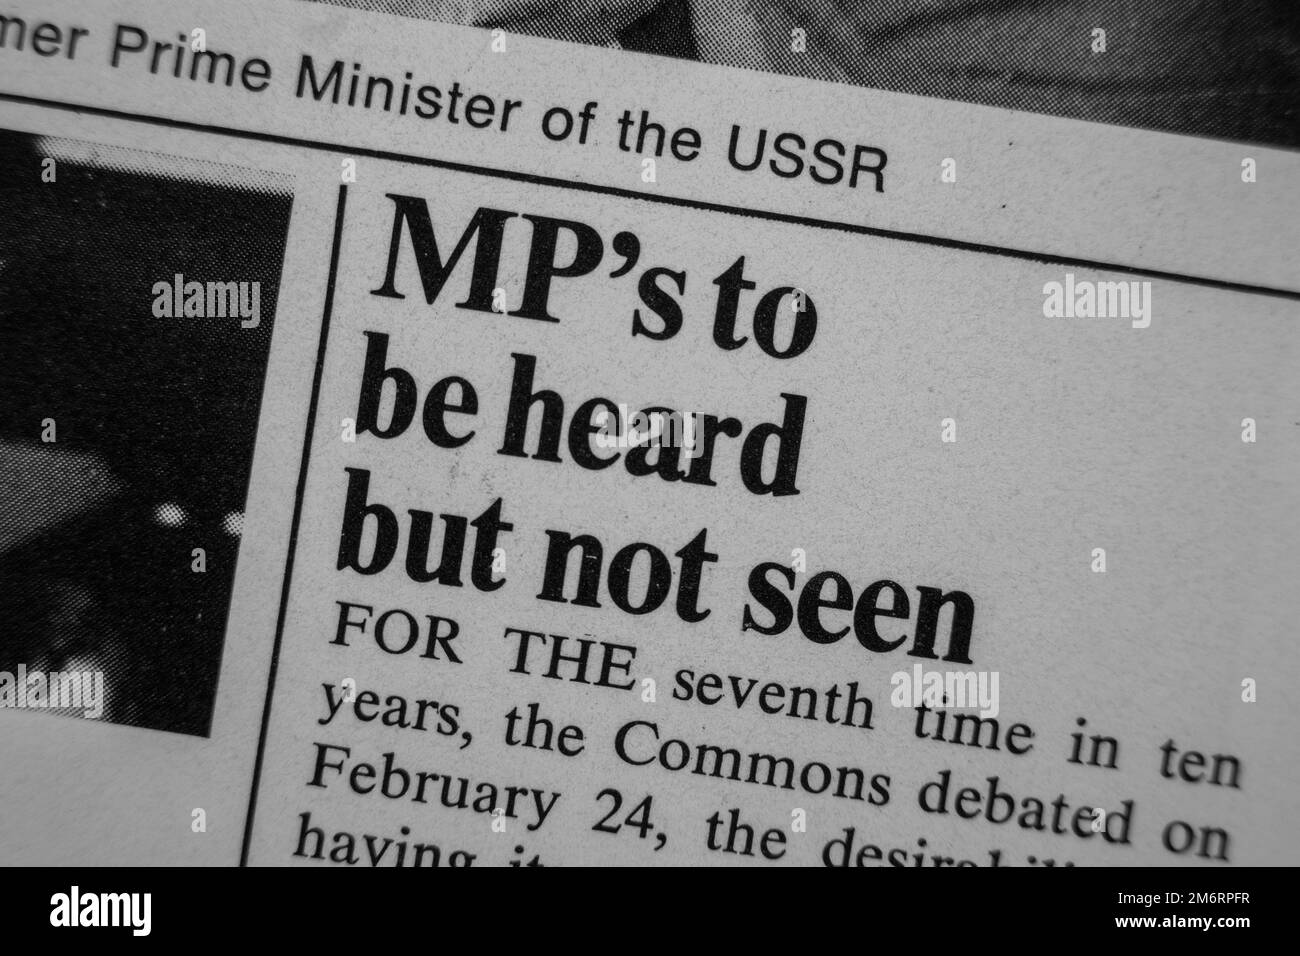 MP's to be heard but not seen - news story from 1975 newspaper headline article title in black and white Stock Photo